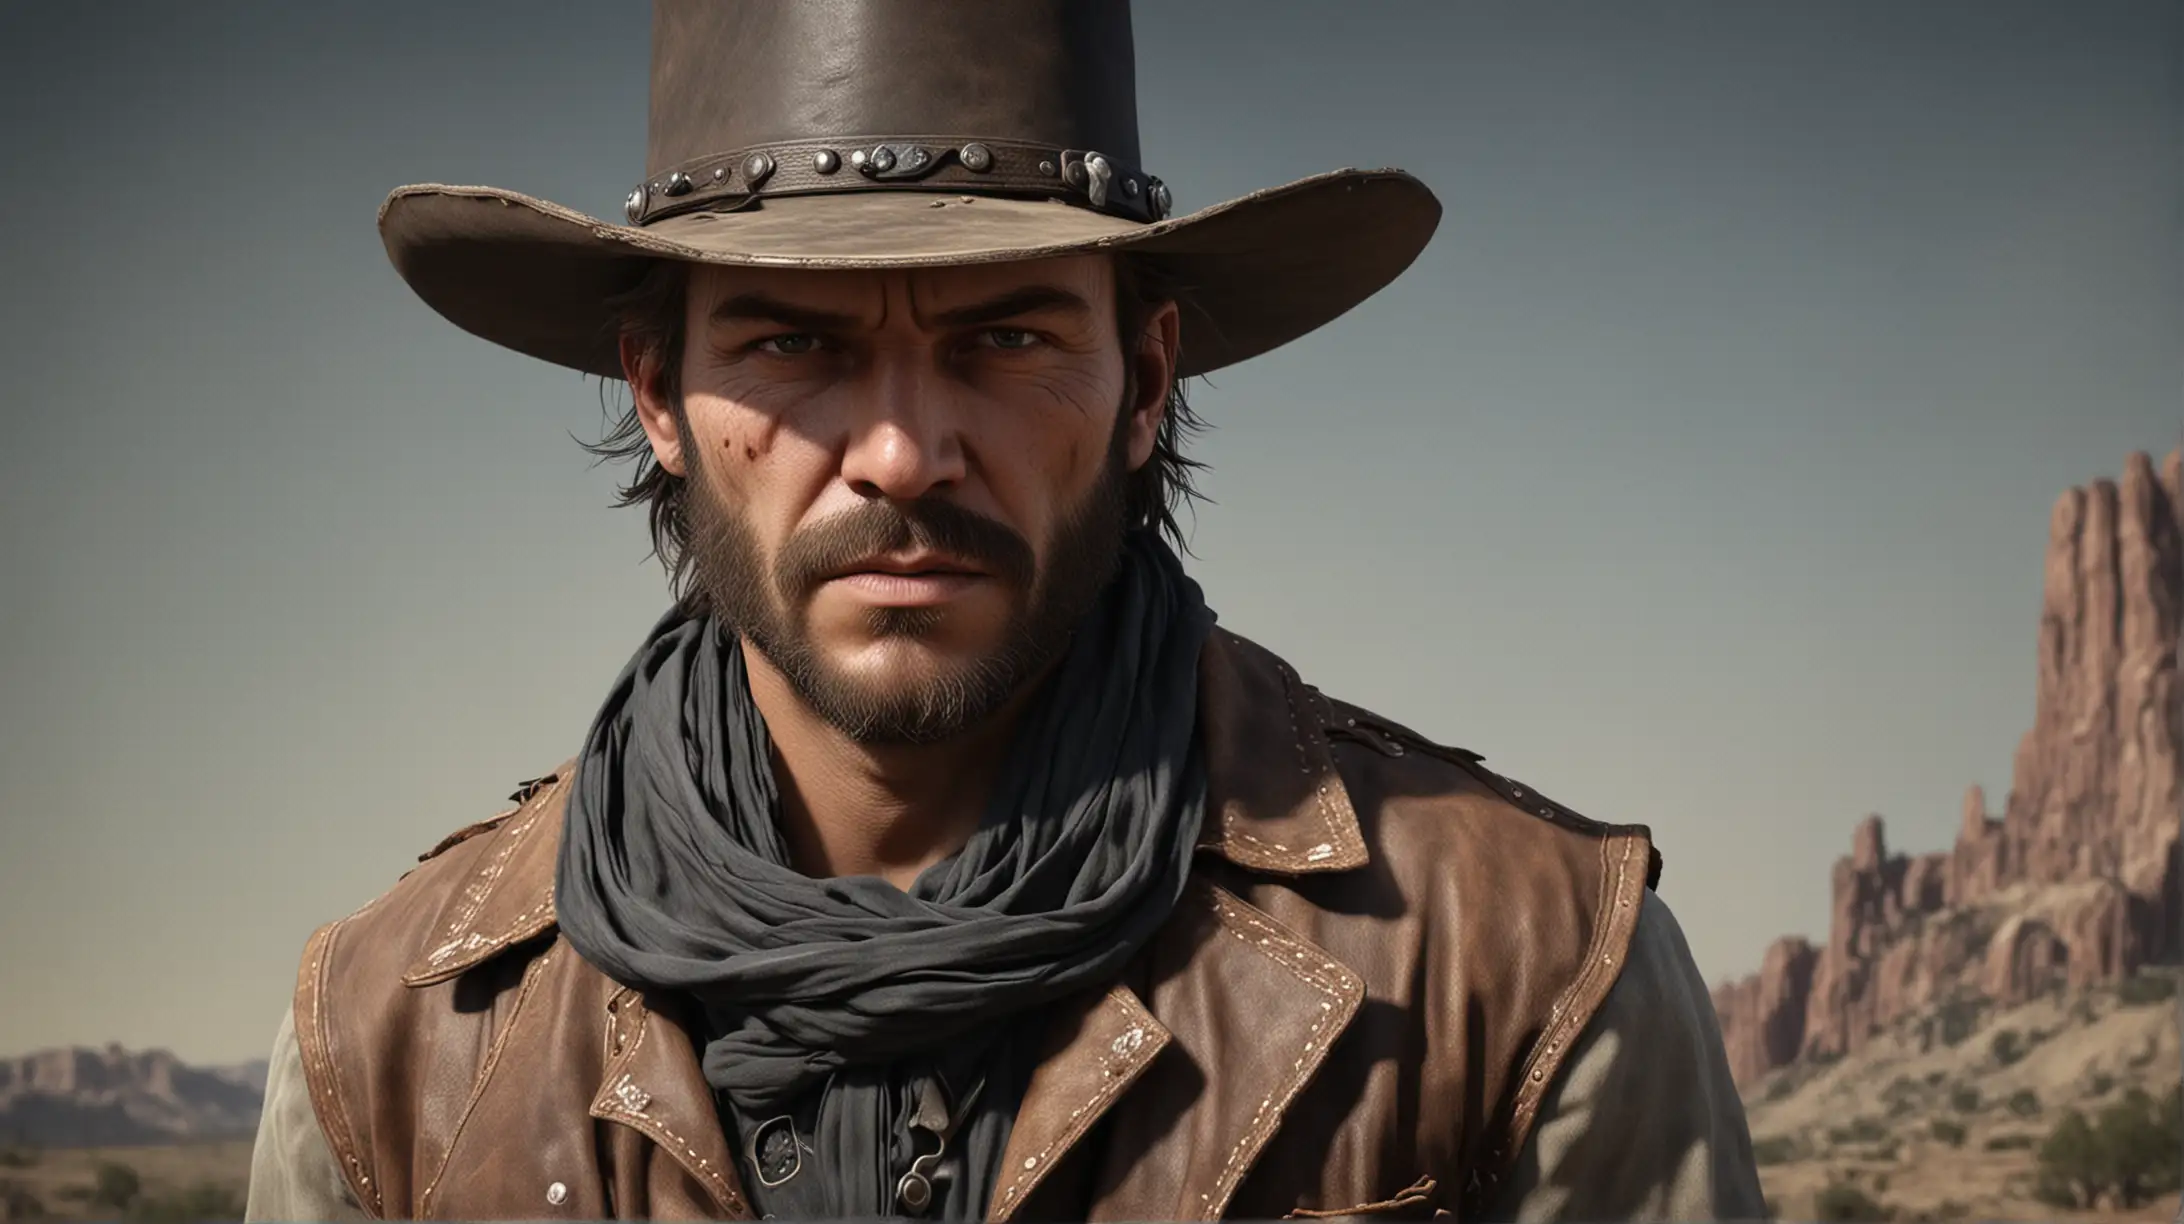 Hyper realistic wild west outlaw grit, tuff, male cowboy, mean looking